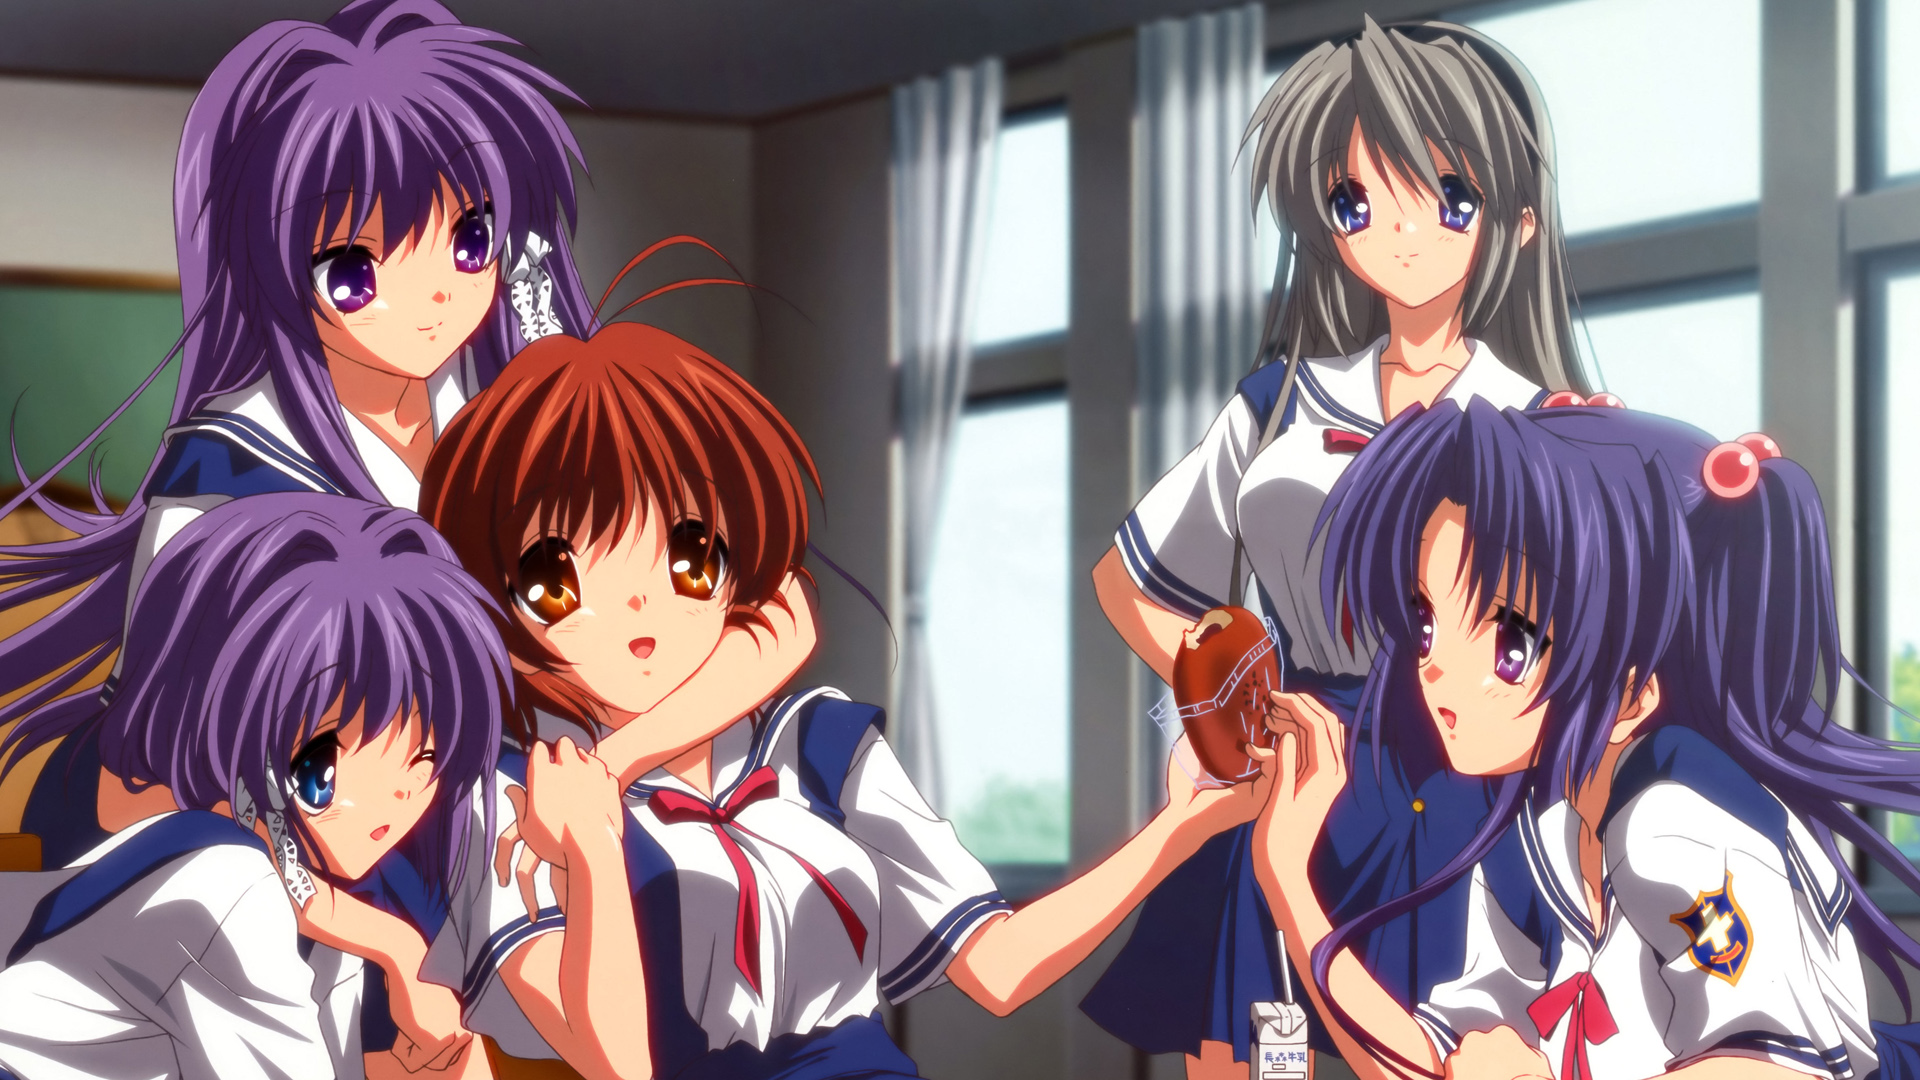 clannad game or anime first